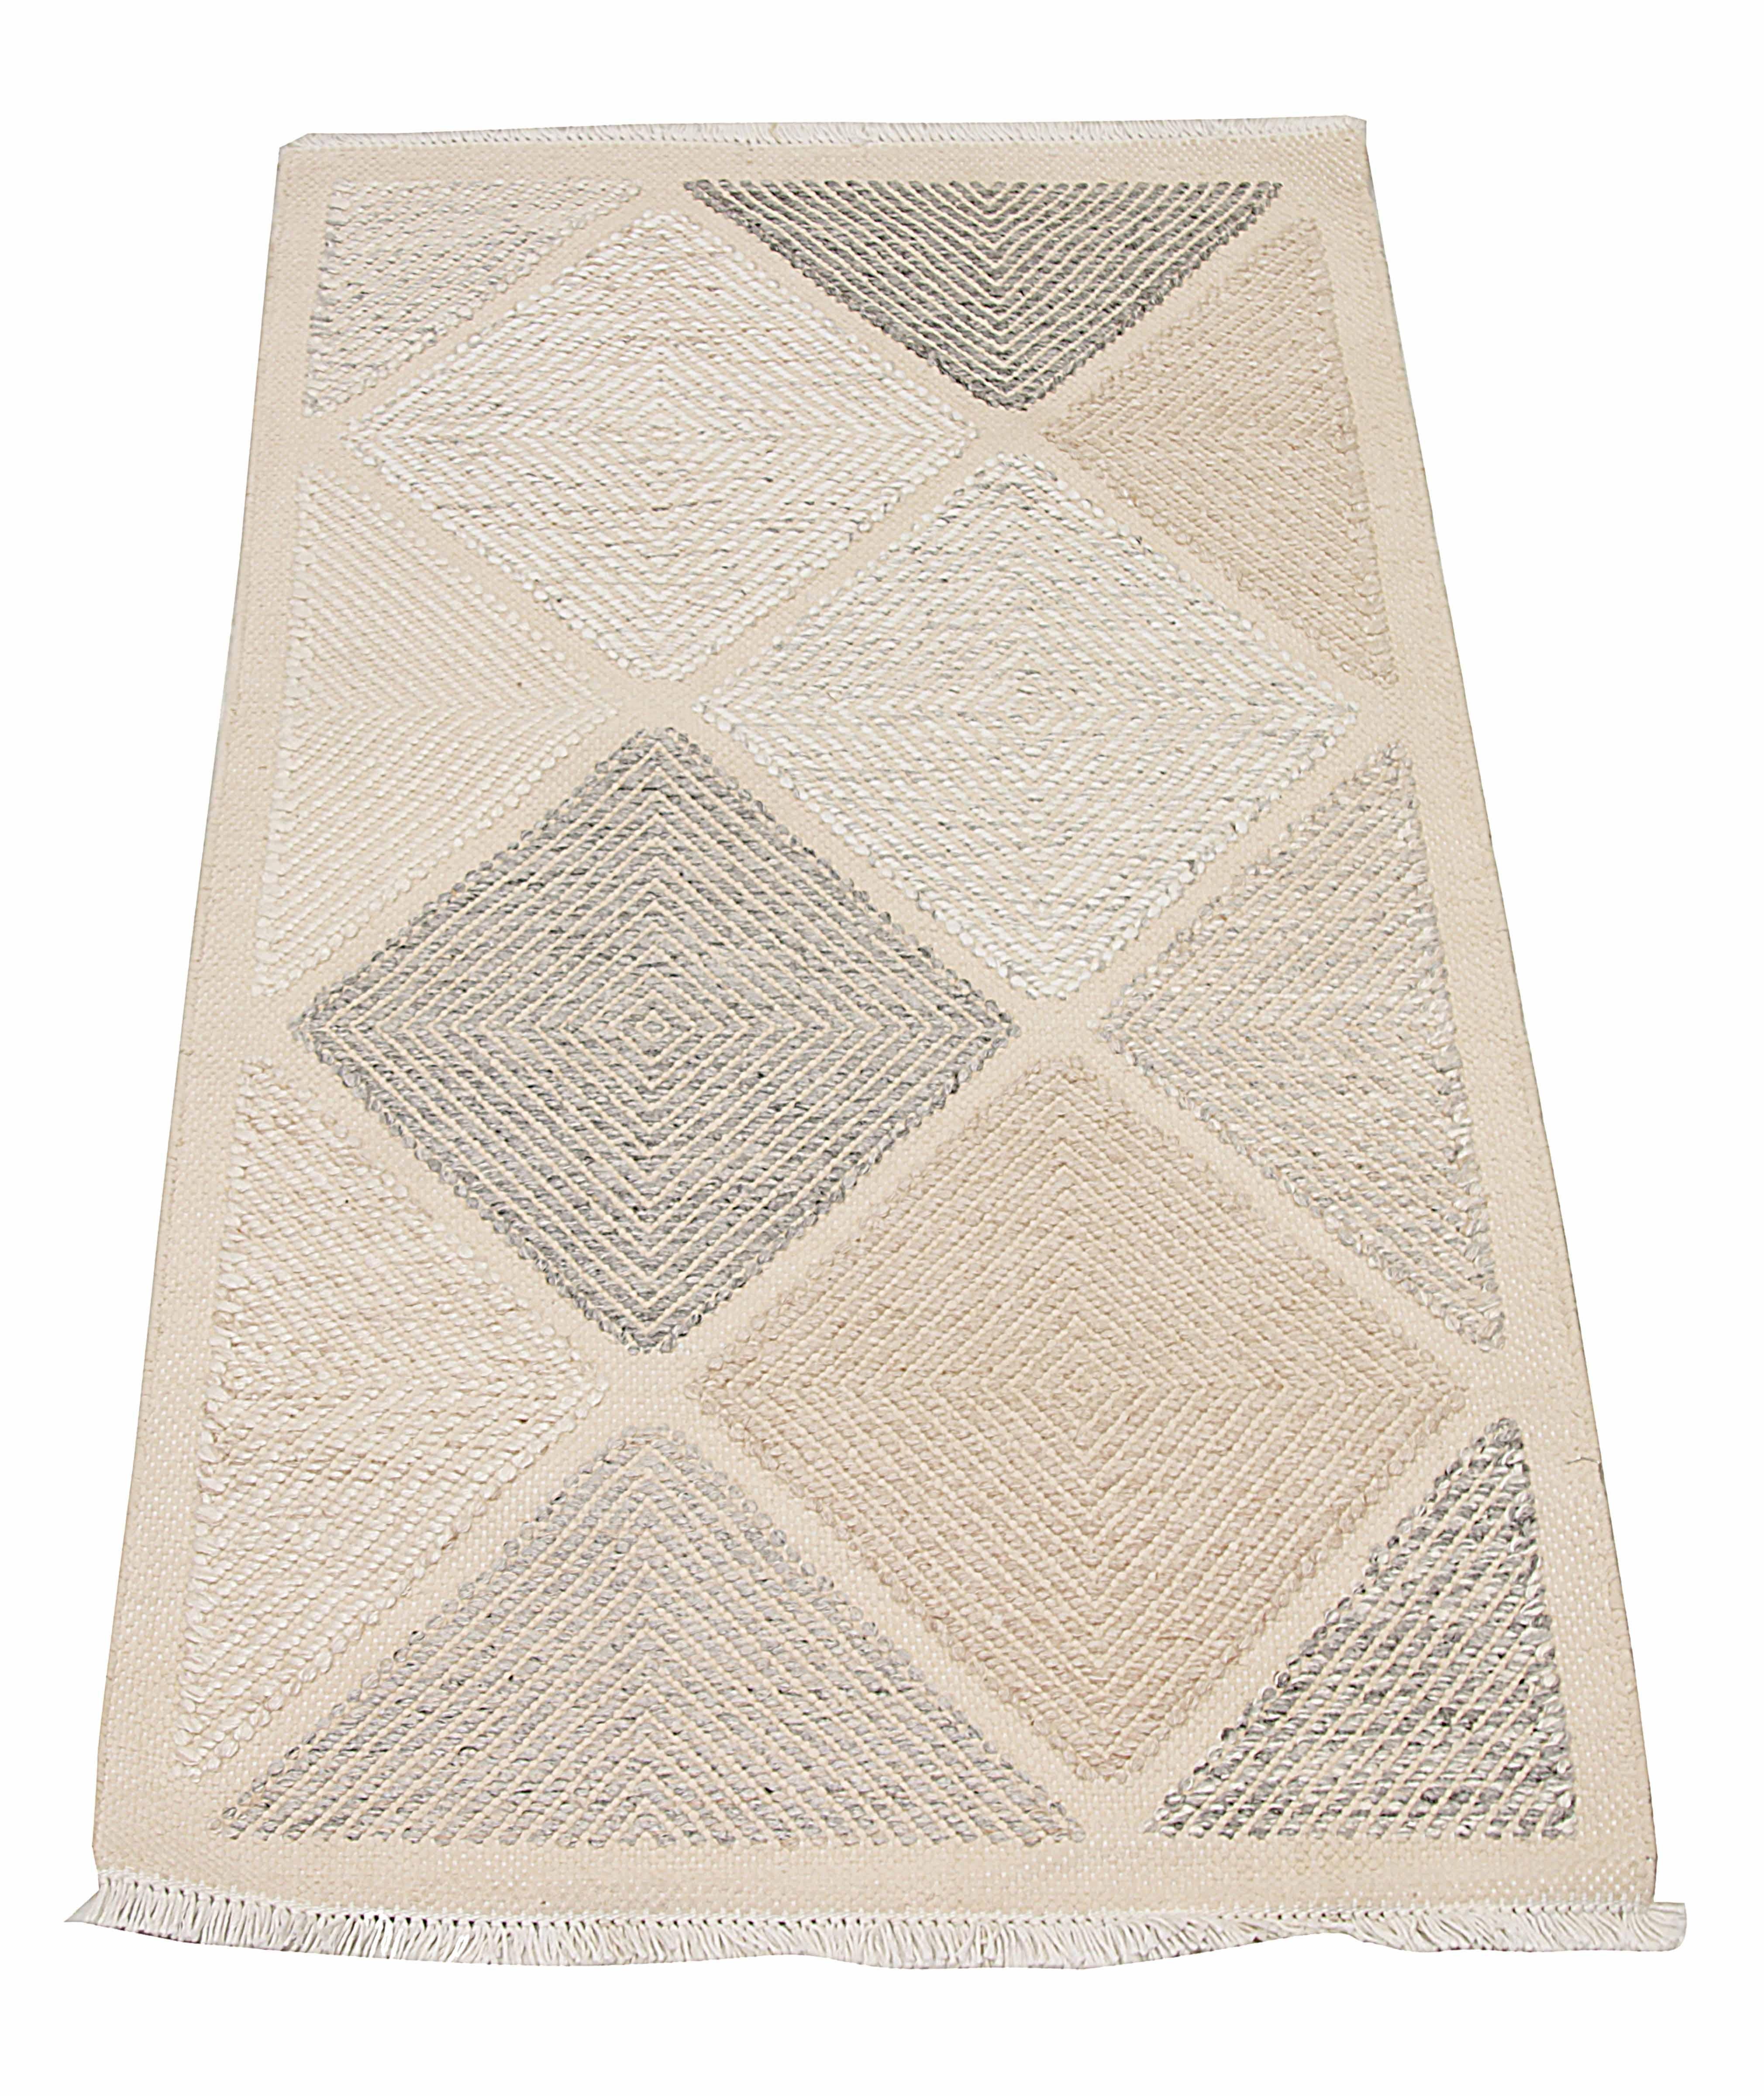 Modern Area rug handwoven from the finest sheep’s wool. It’s colored with all-natural vegetable dyes that are safe for humans and pets. It’s a traditional Swedish design handwoven by expert artisans. It’s a lovely area rug that can be incorporated